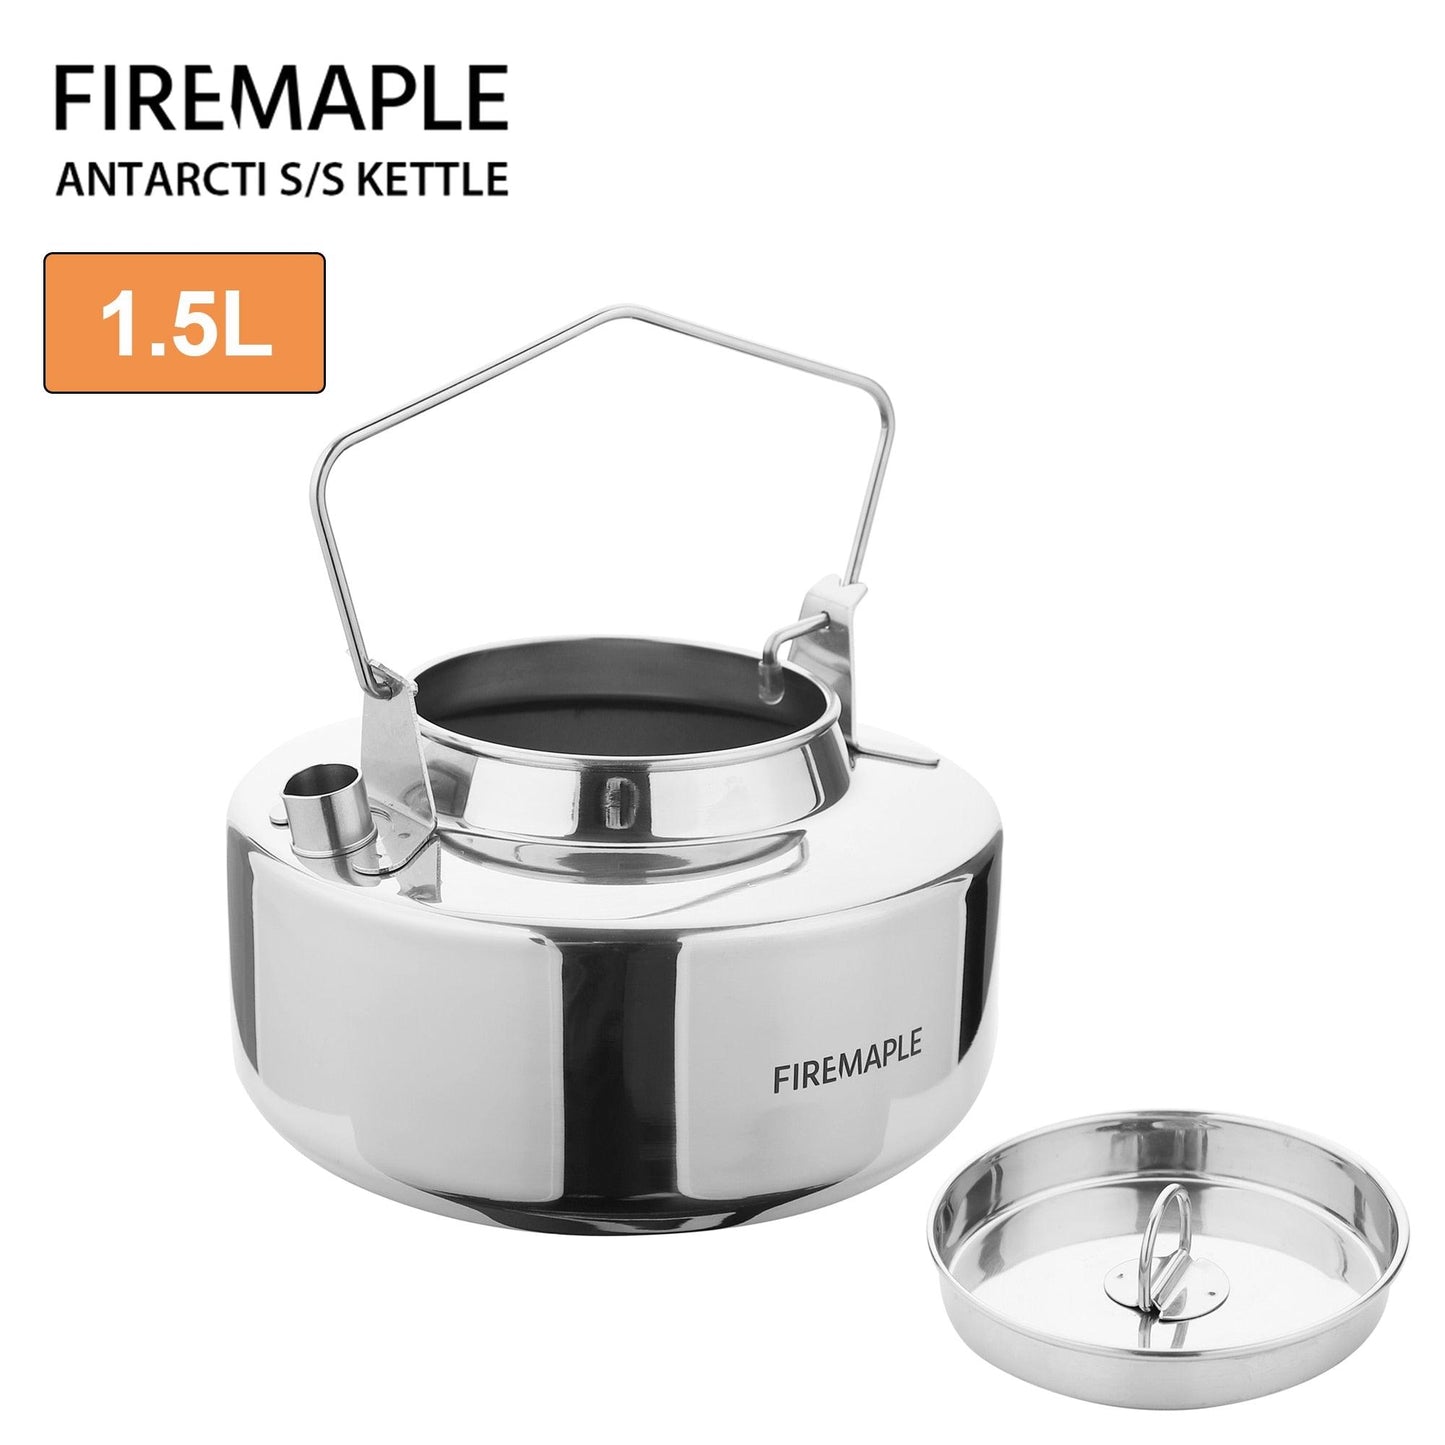 Fire Maple Antarcti Stainless Steel Backpacking Camping Kettle Bushcraft Gear Outdoor Durable Teapot High Quality S304 1L 295g - YOURISHOP.COM